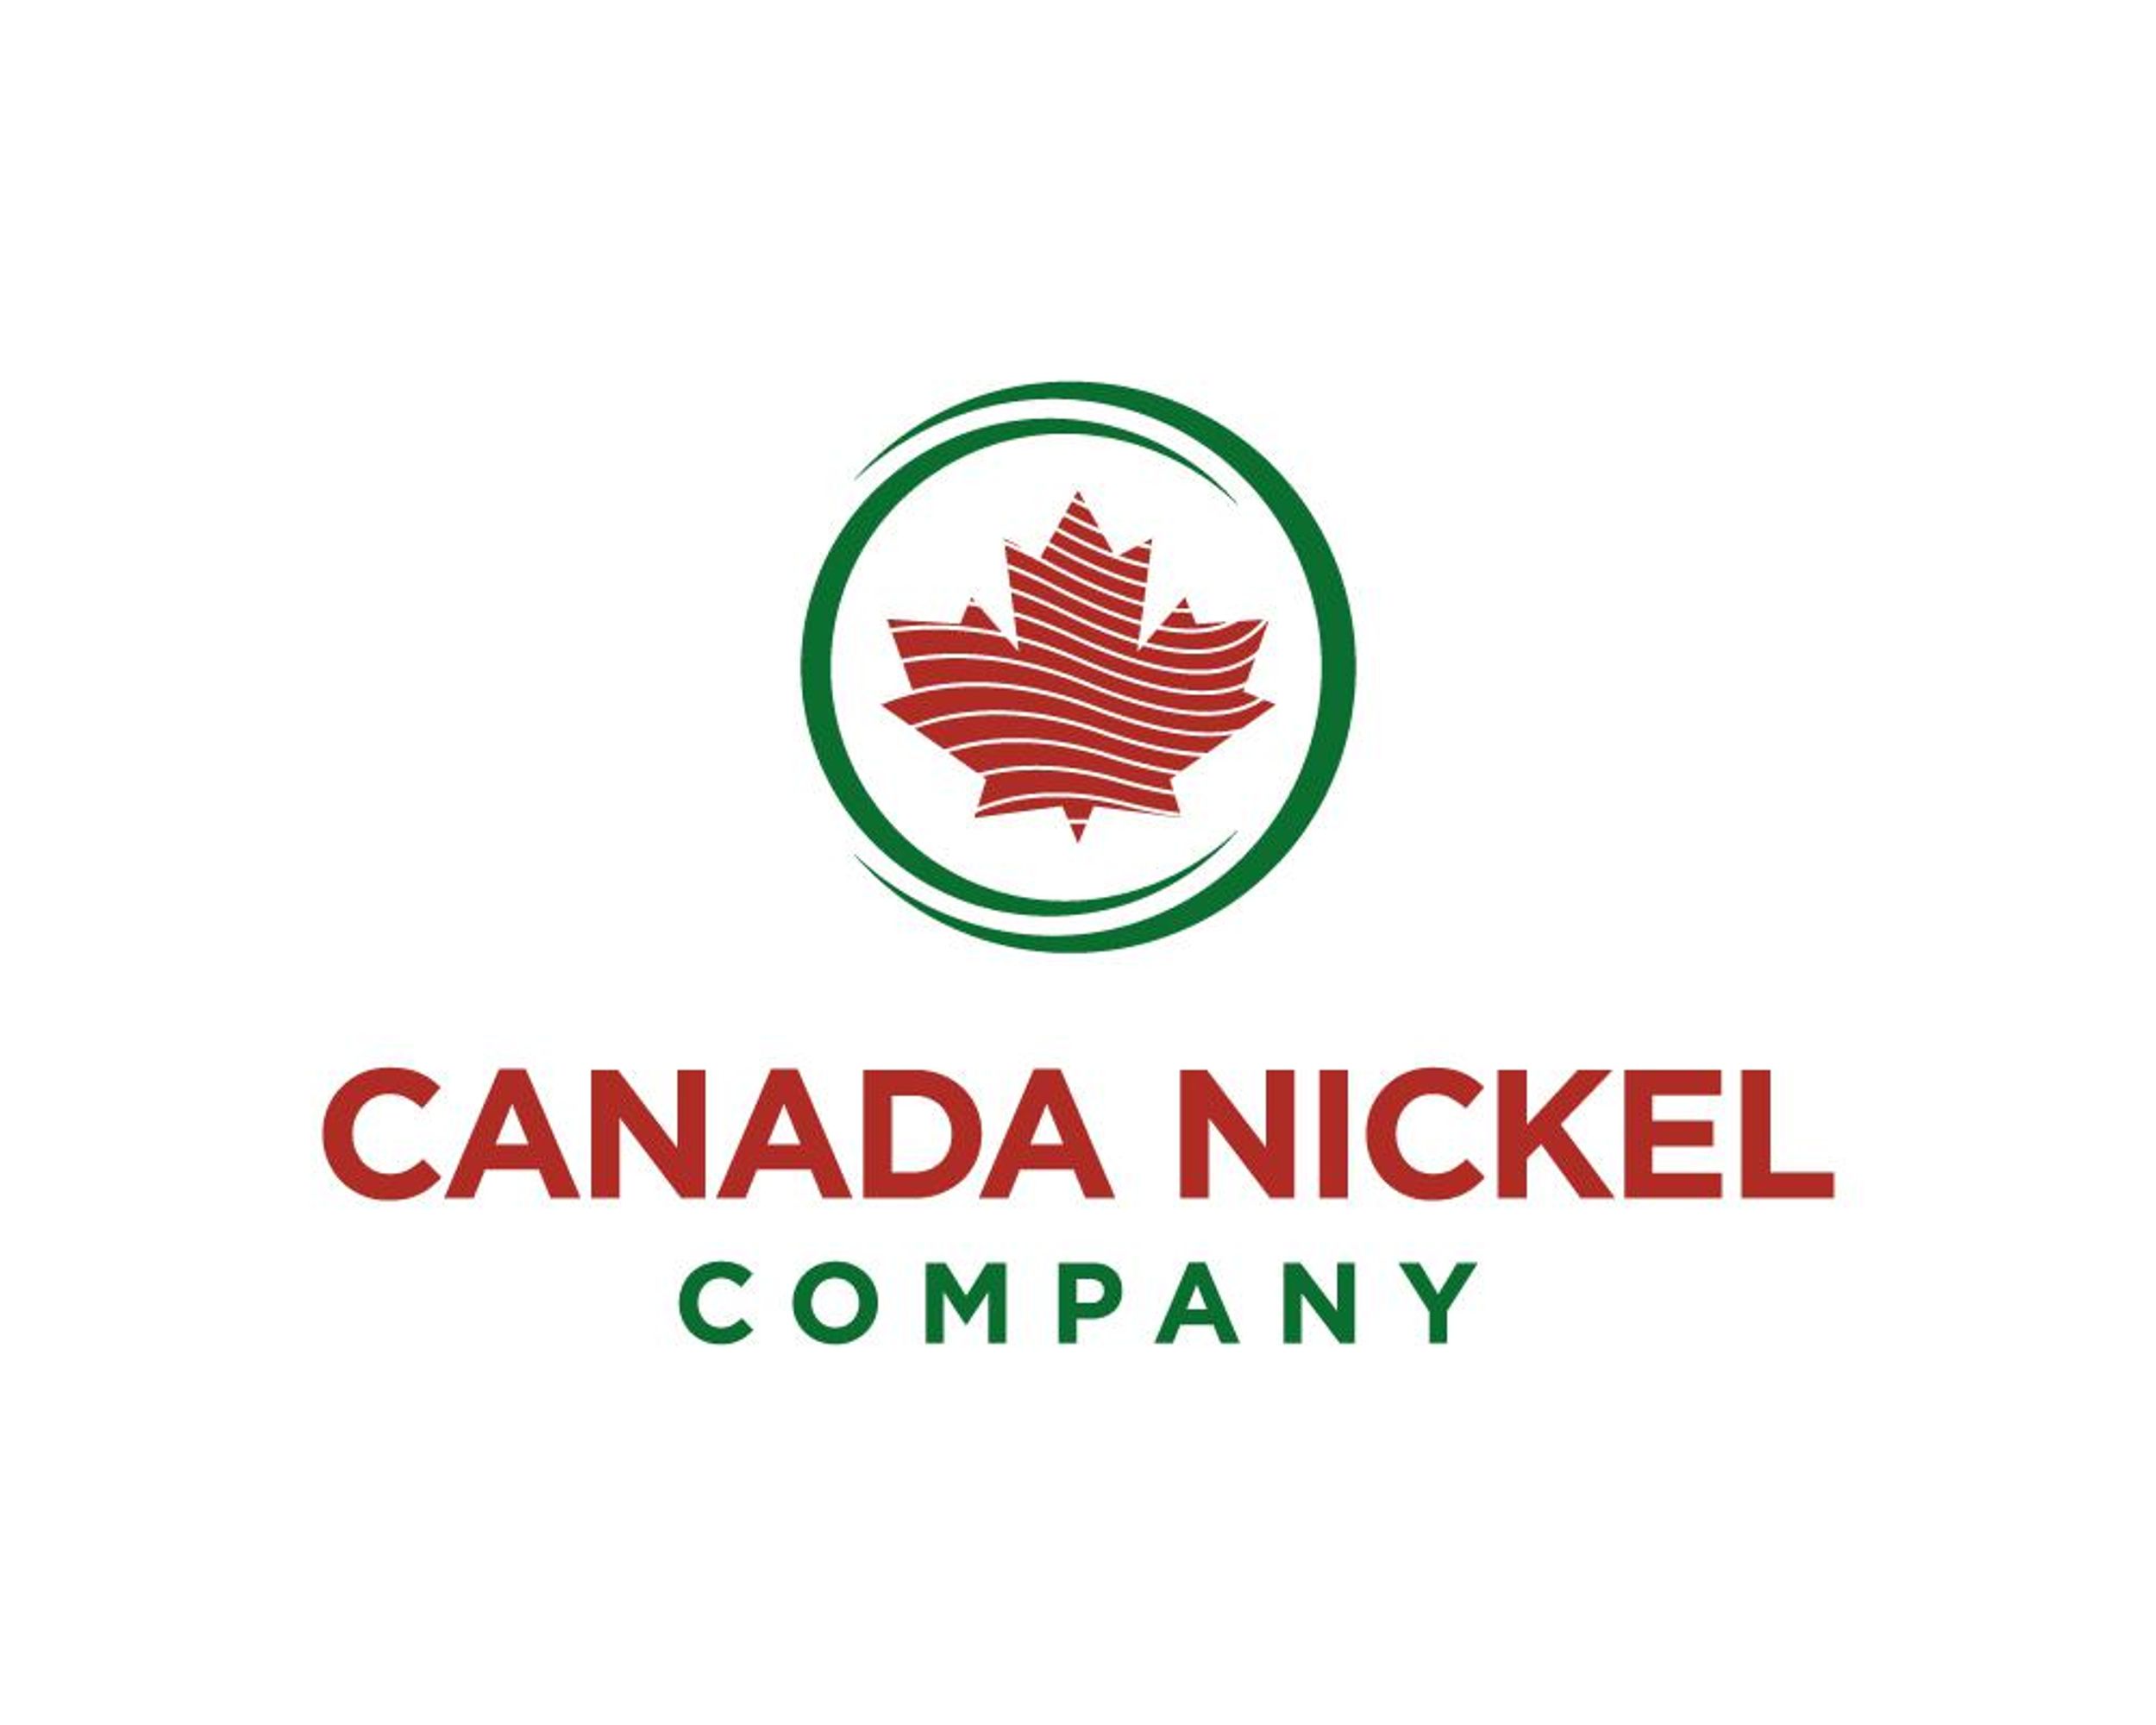 Canada Nickel Announces New Nickel Discovery at Reid with Larger Footprint than Flagship Crawford Property Main Zone; Provides Update on Regional Exploration